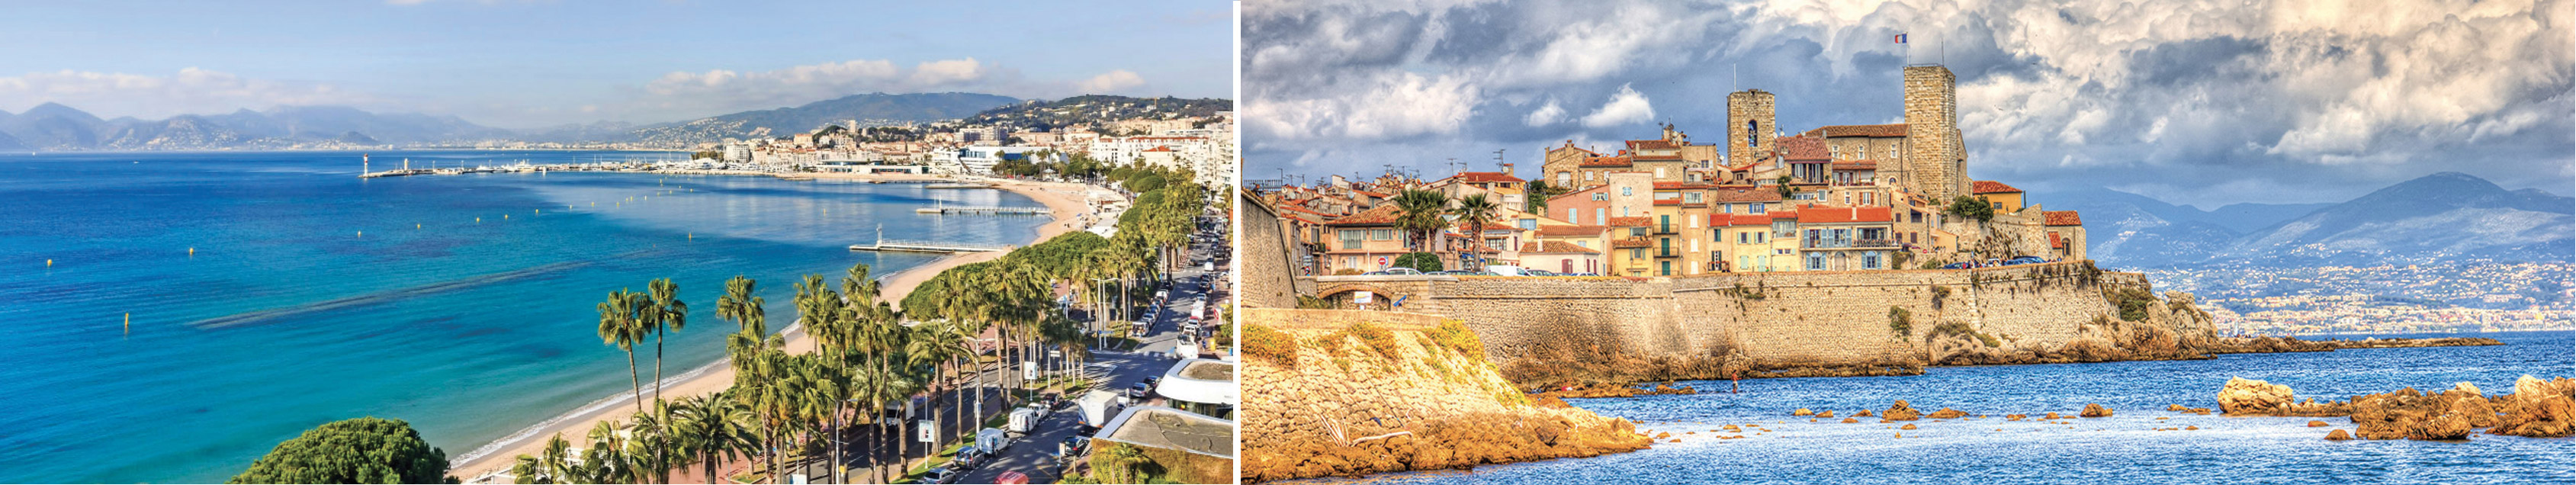 Article_2Evolution-marché-Immobilier_Cannes-vs-Antibes_Blog_Lux-Rentals-Cap-Antibes